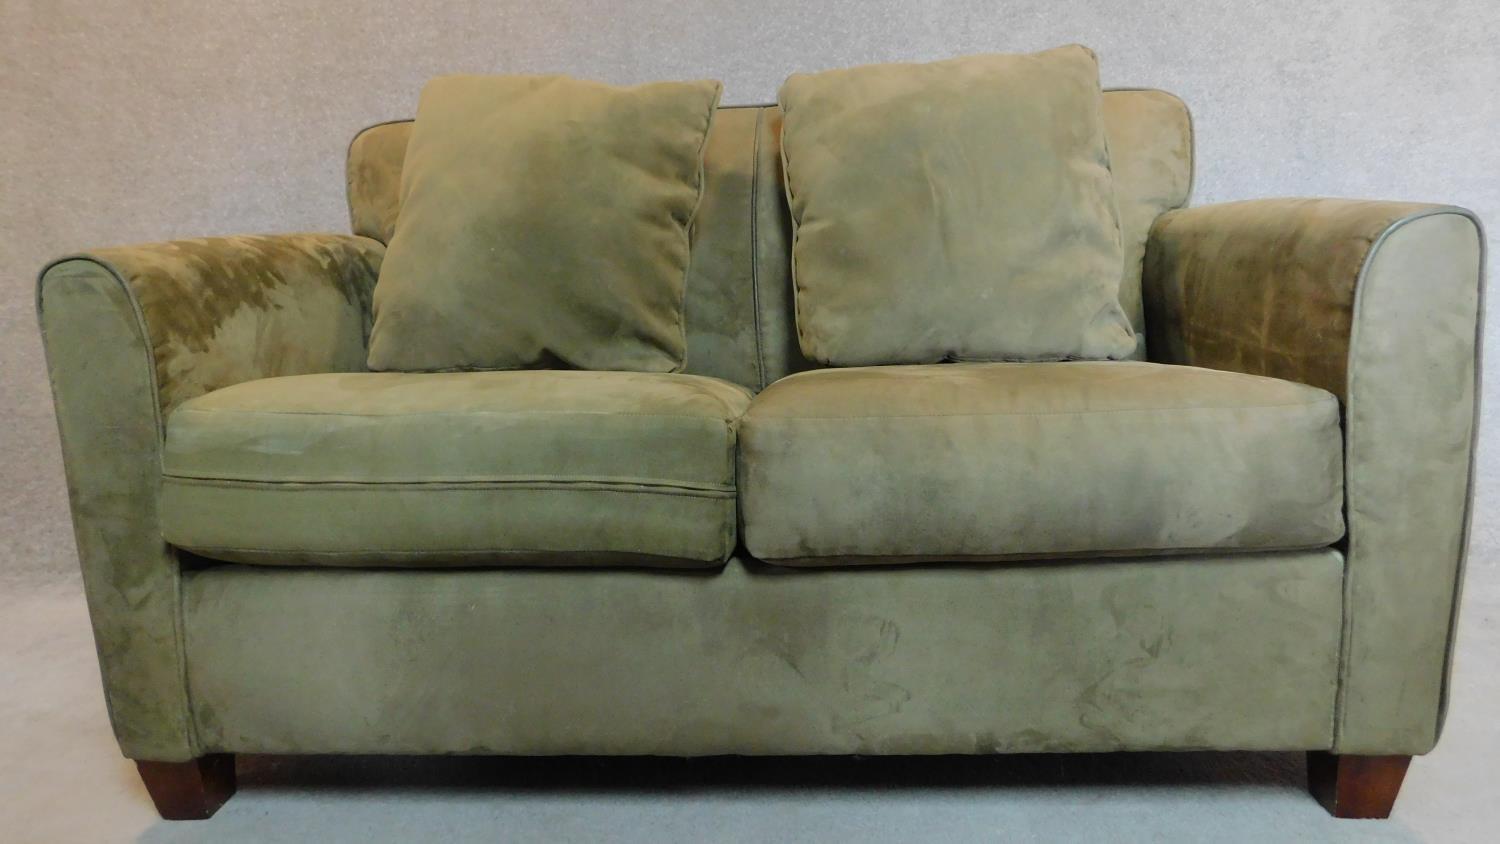 A 2 seater sofa in sage faux suede upholstery. 88x145x93cm - Image 2 of 5